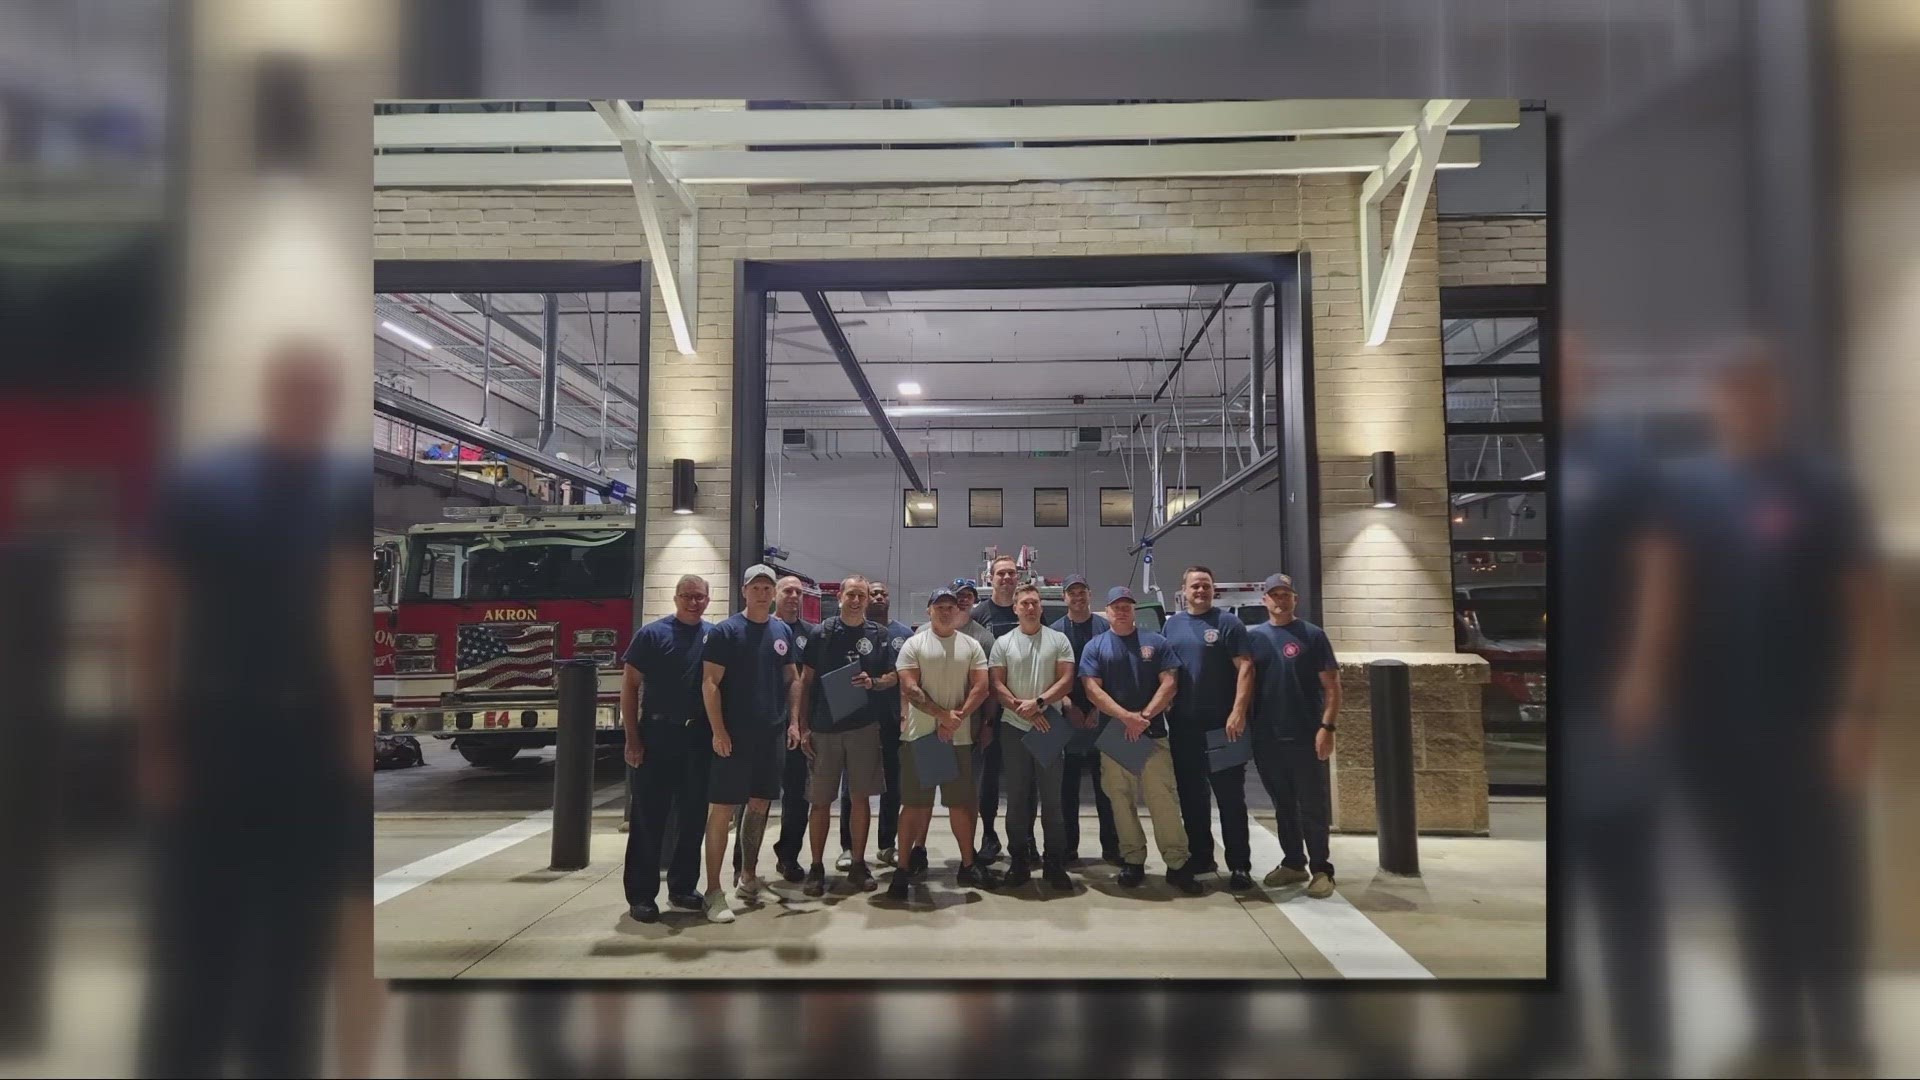 The team of 13 will be in Leesville, Louisiana for 14 days to man stations, while crews there combat wildfires across the state.